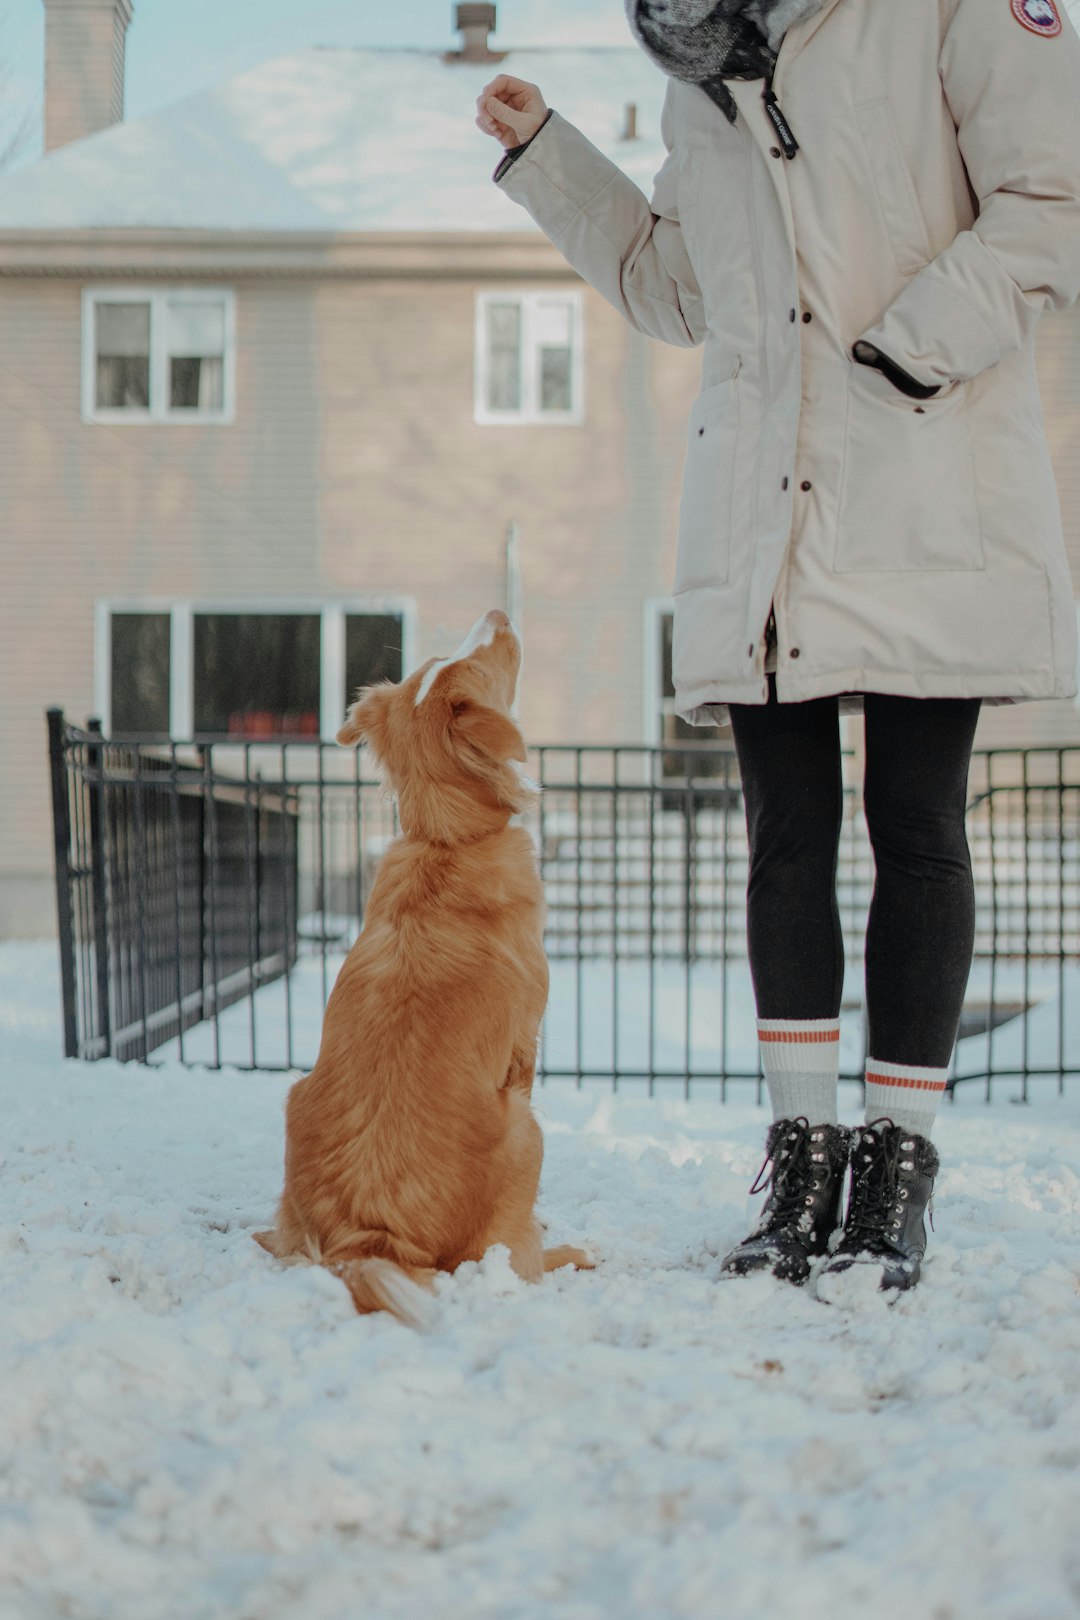 person in gray coat and black pants standing on snow covered ground beside brown dog during